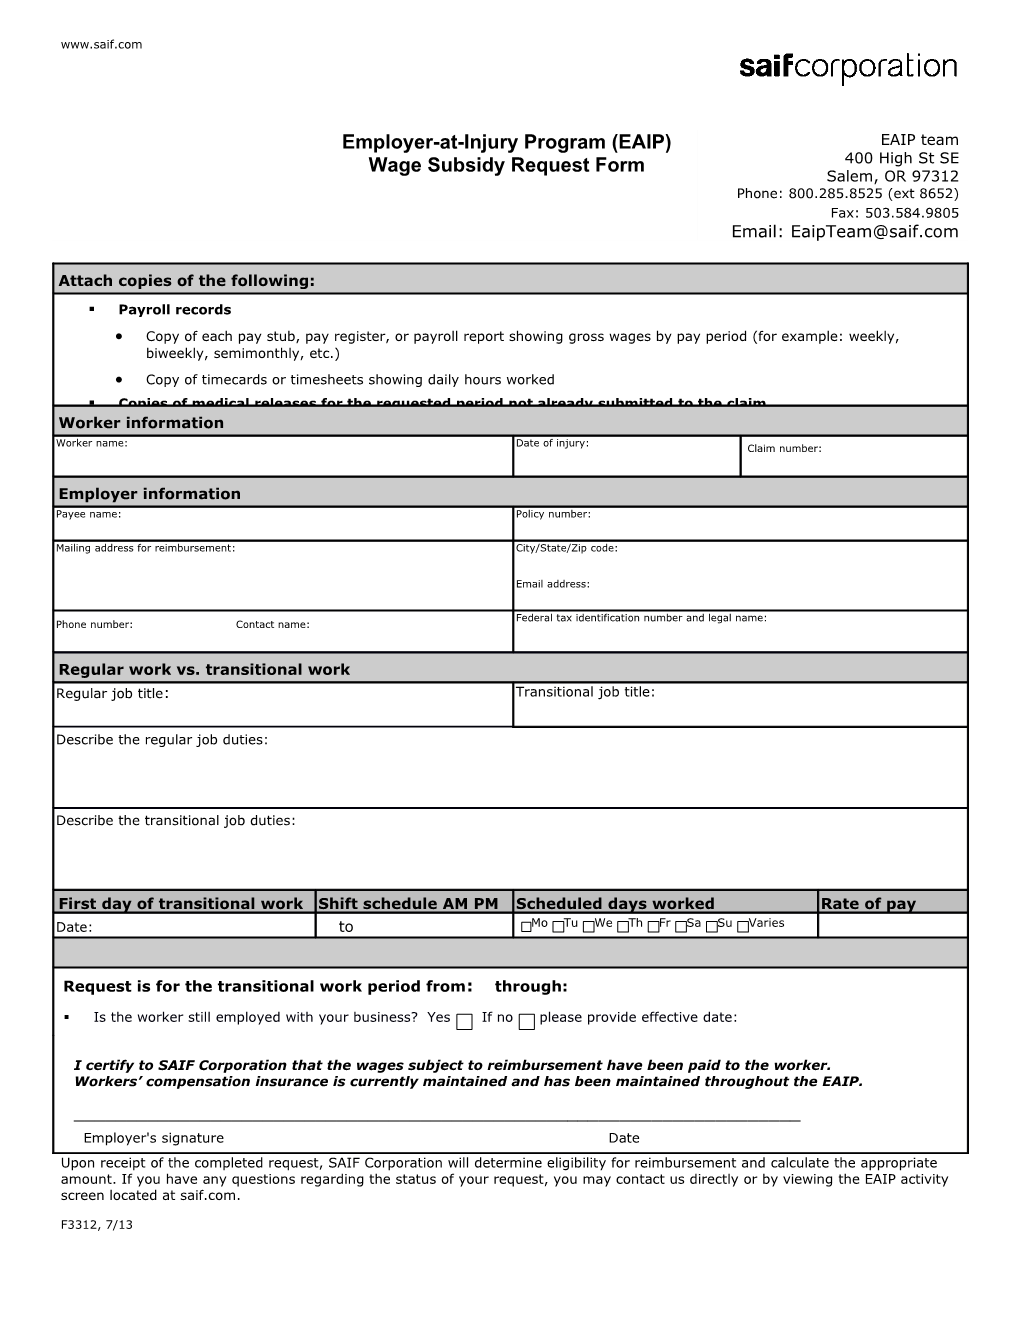 Employer-At-Injury Program (EAIP) Wage Subsidy Request Form